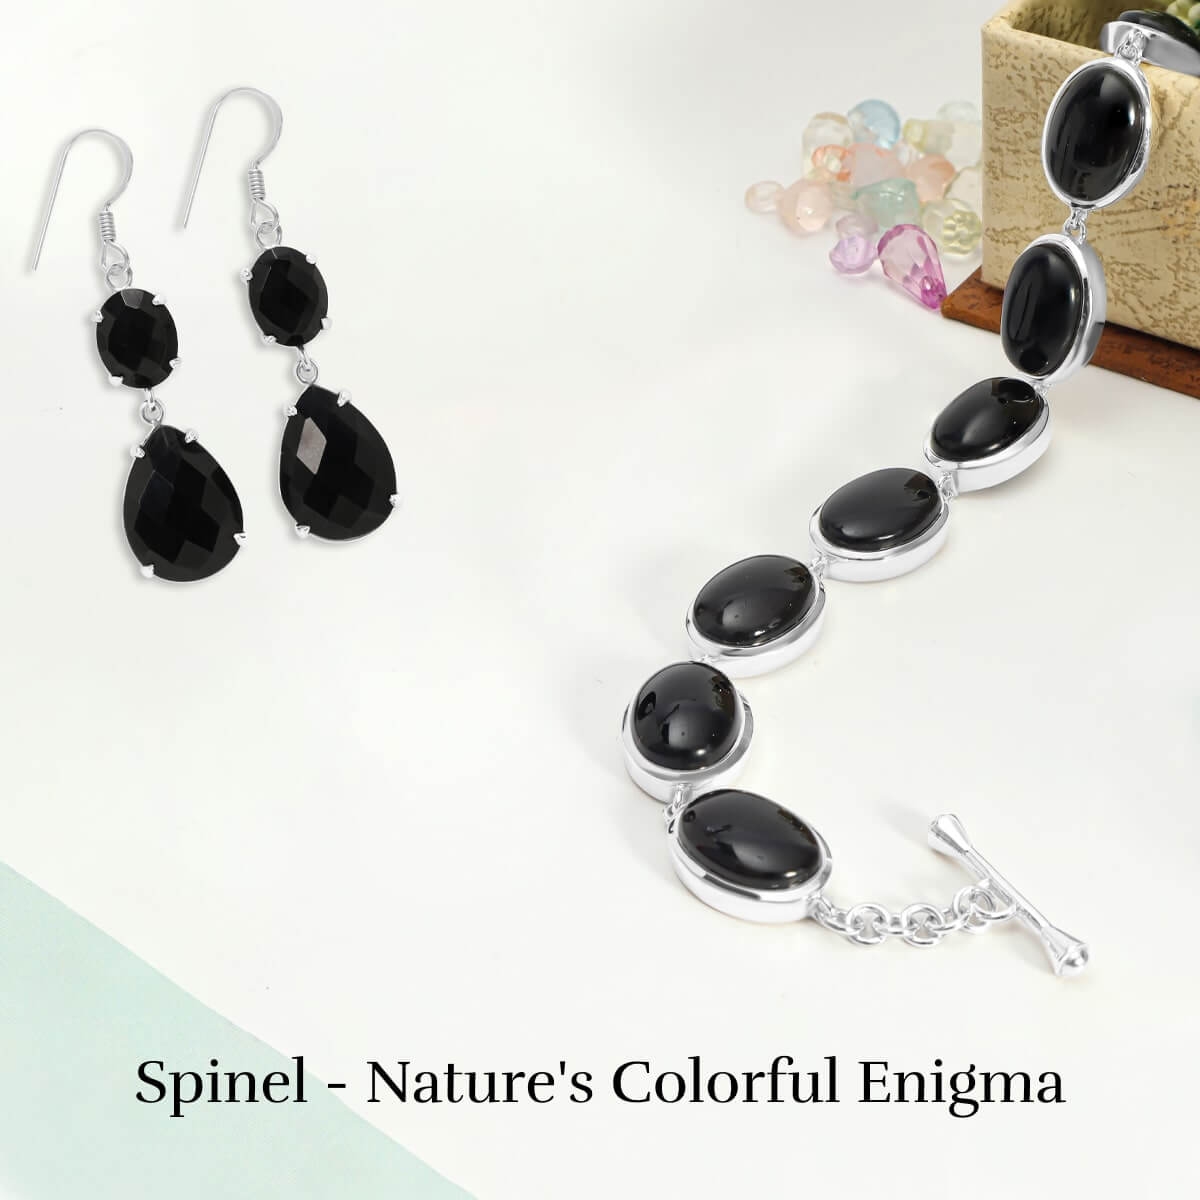 Facts About Spinel